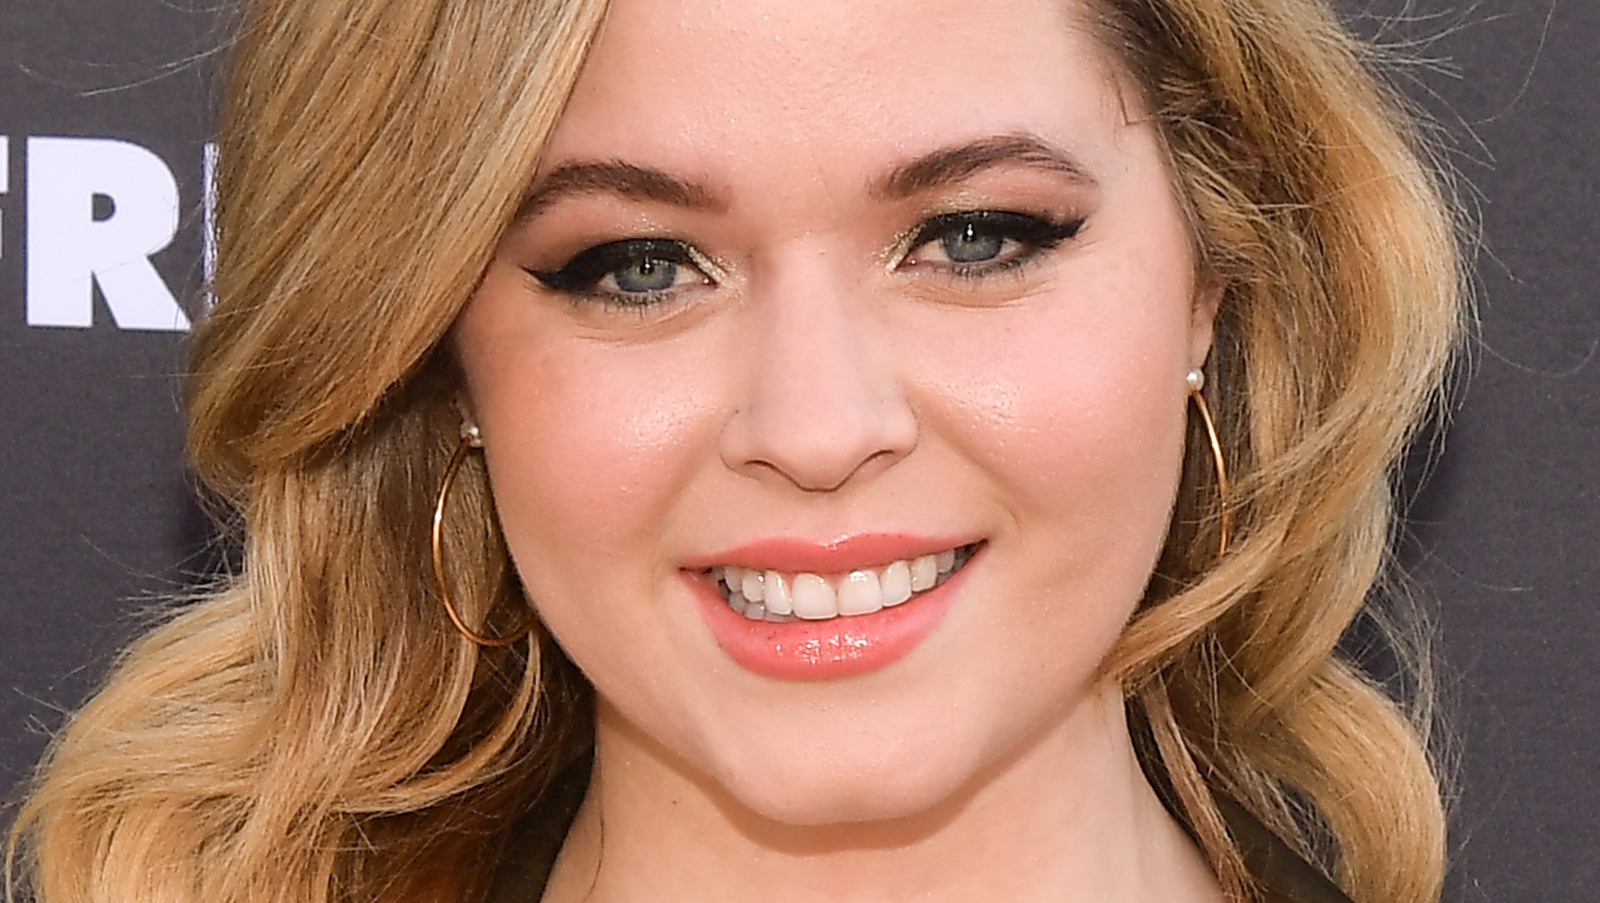 1. "Sasha Pieterse's Iconic Blonde Hair Evolution: From Pretty Little Liars to Now" - wide 5